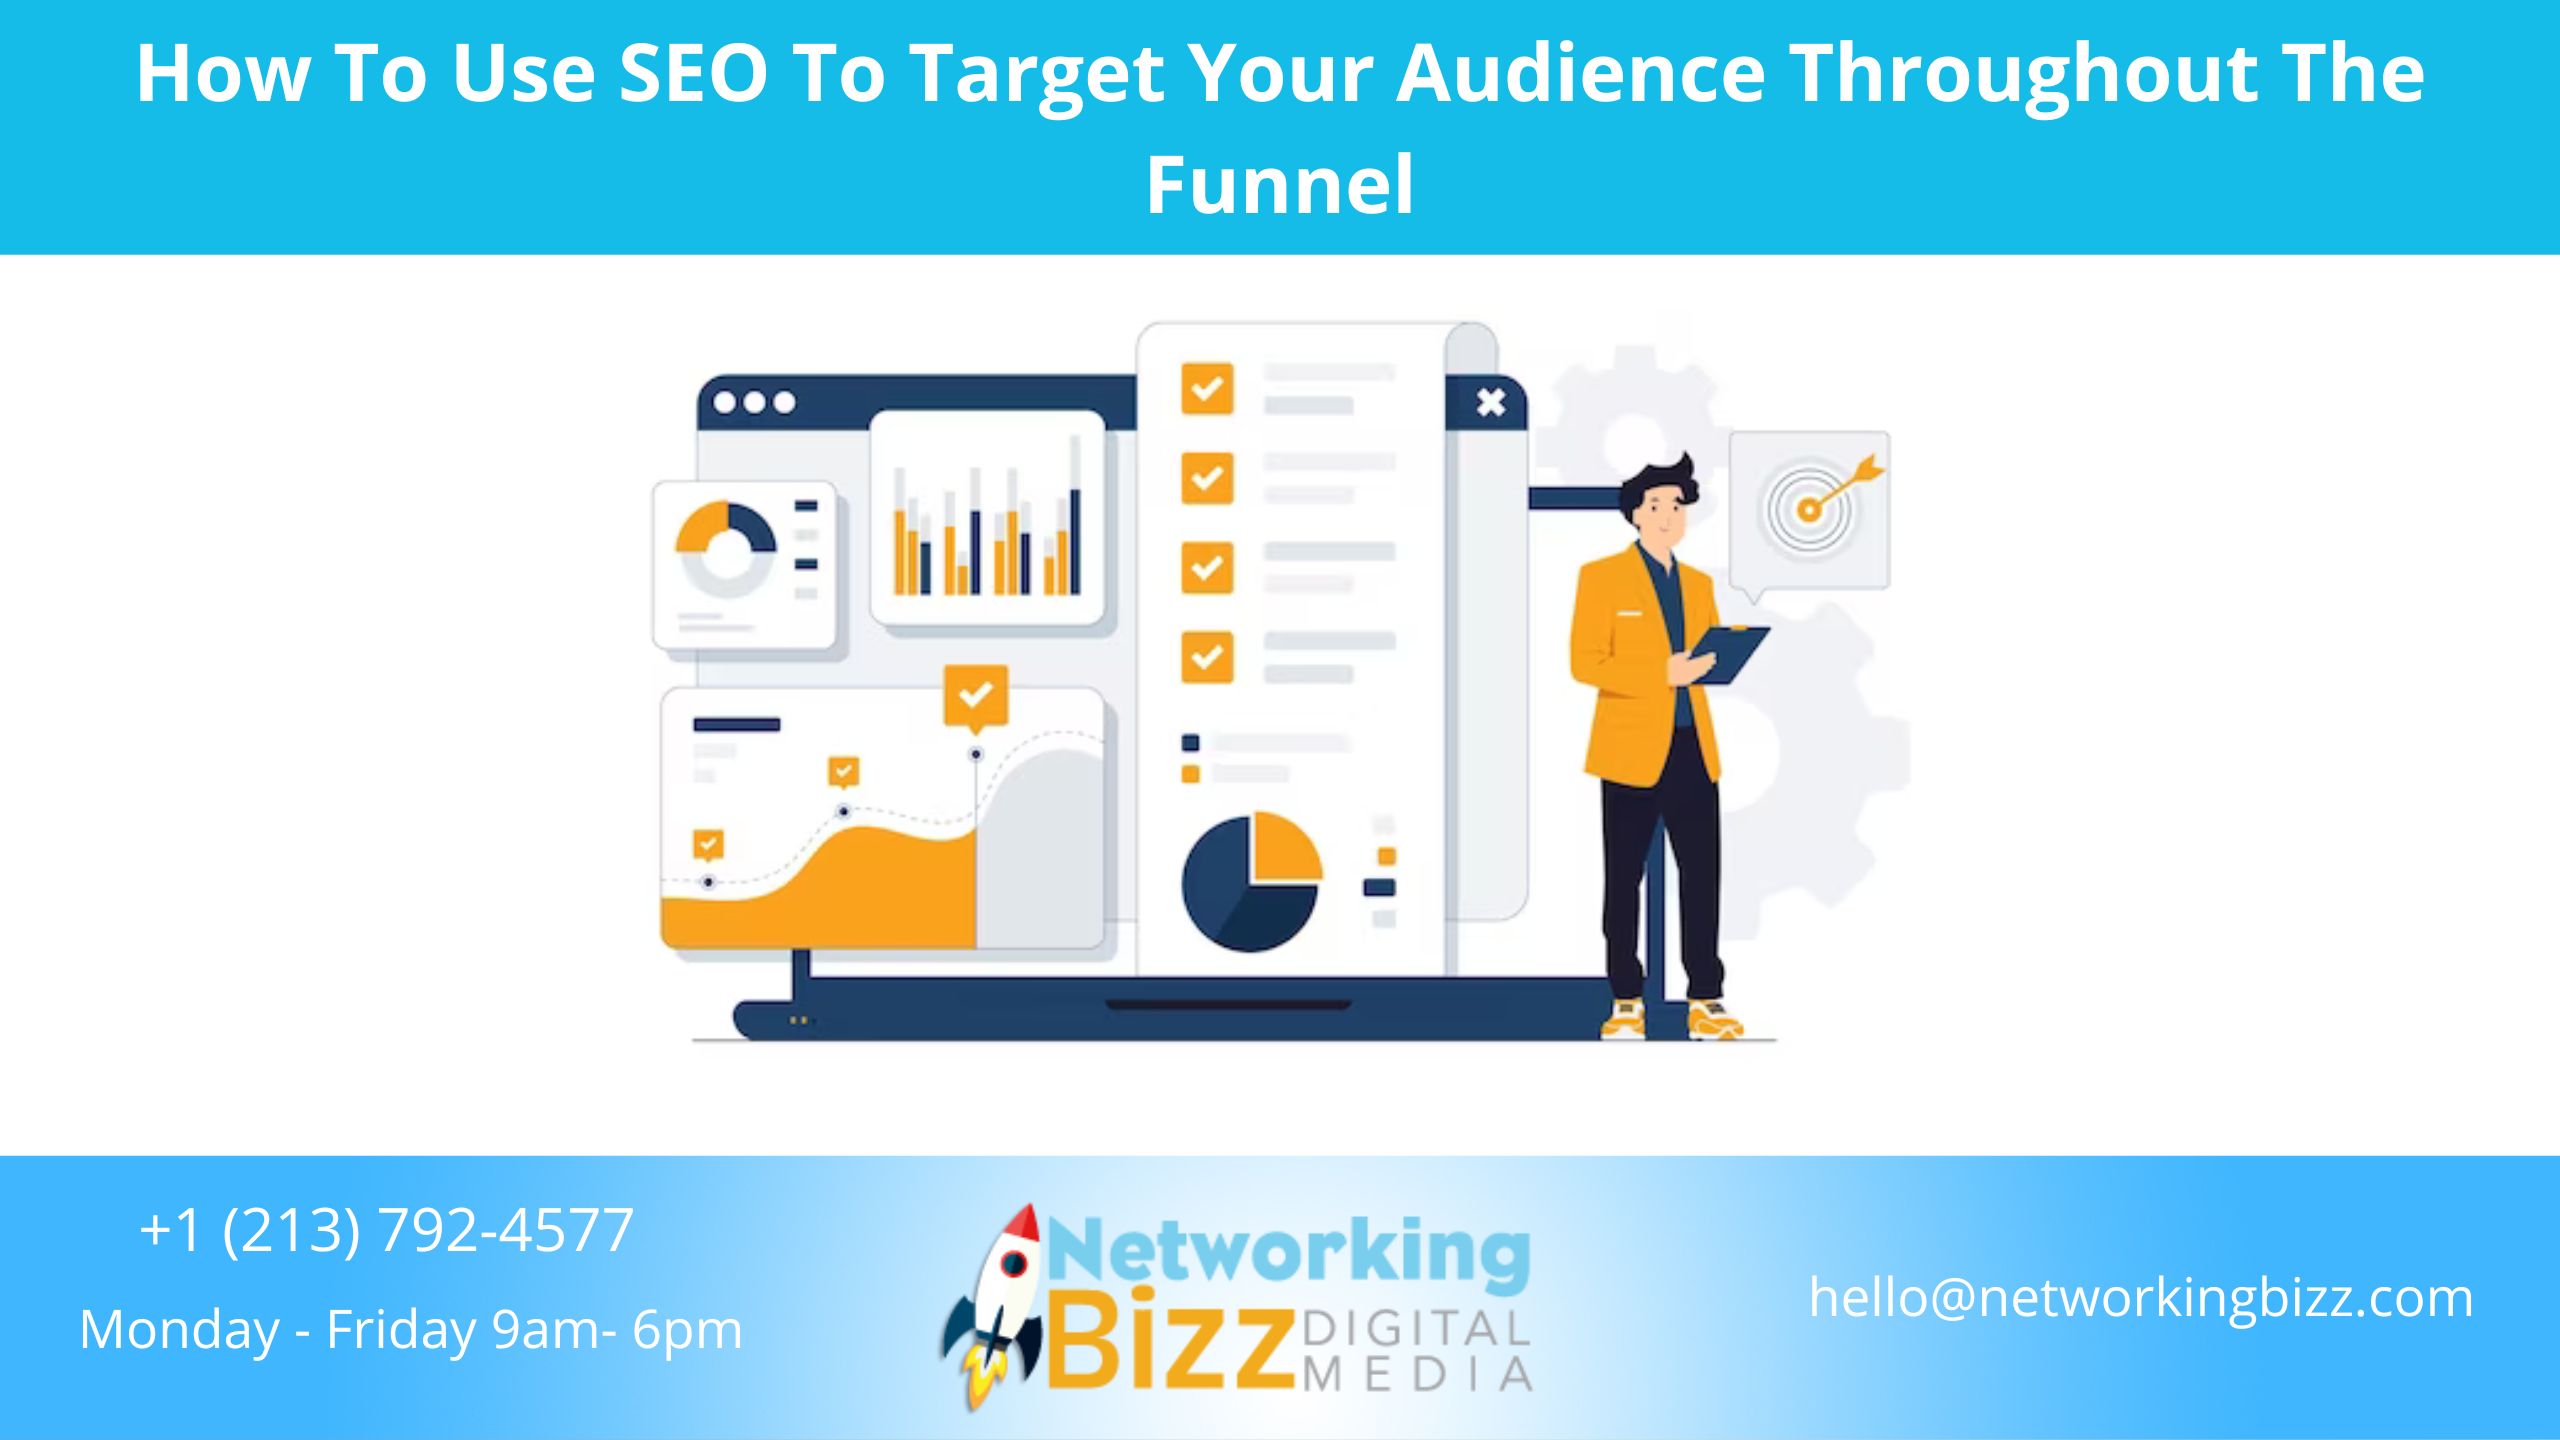 How To Use SEO To Target Your Audience Throughout The Funnel